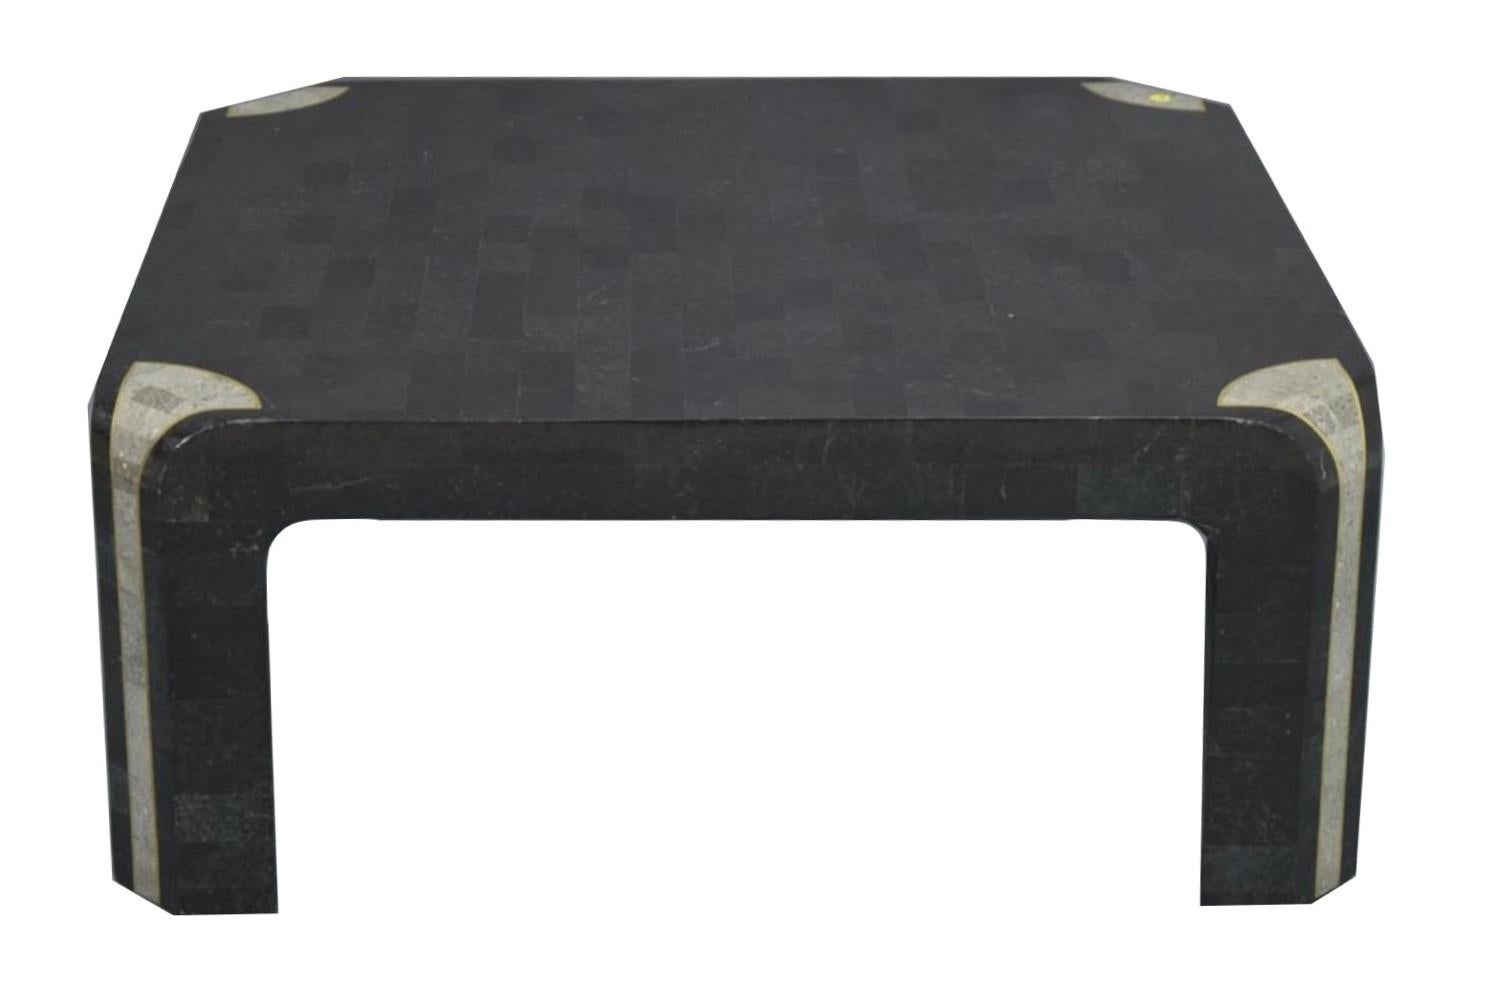 Tessellated stone coffee table attributed to Maitland Smith. Constructed of two colors of marble and inlaid brass.

*Matching Console Table also available, price and dimensions on request.